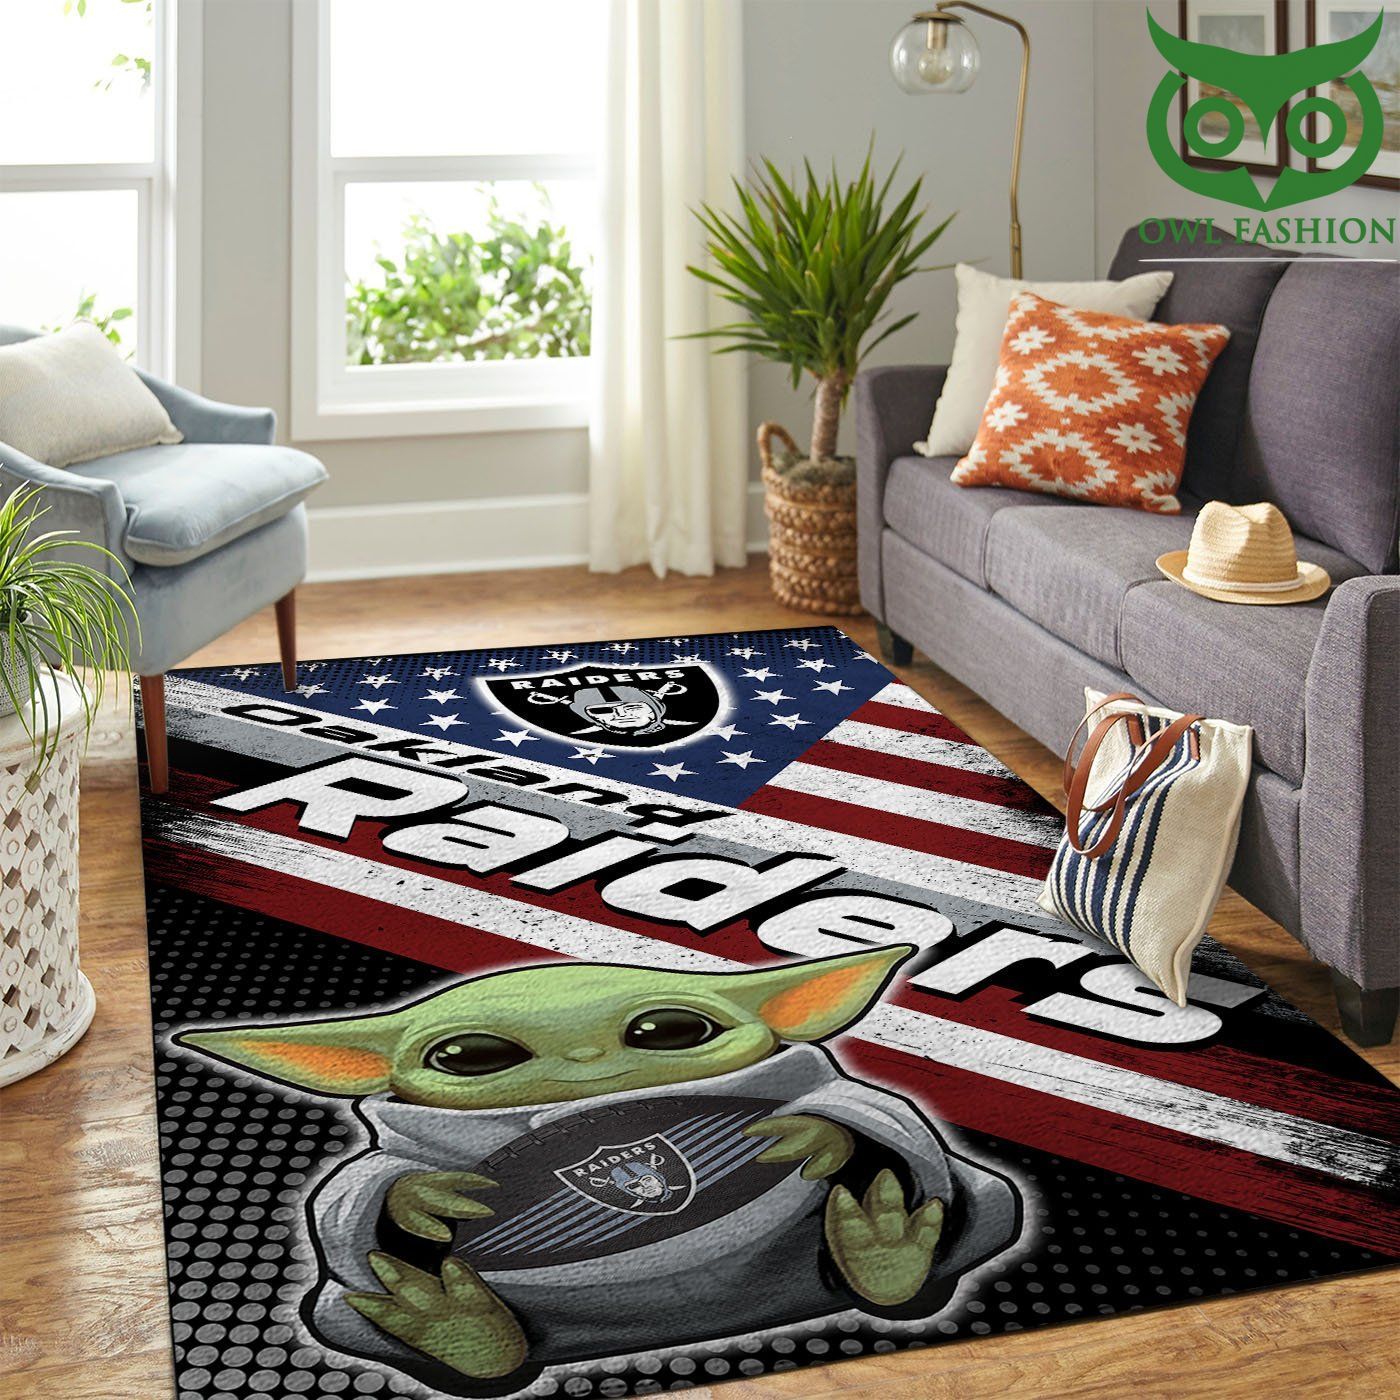 Oakland Raiders Nfl Team Logo Baby Yoda Us Style Nice Gift carpet rug Home and floor Decoration